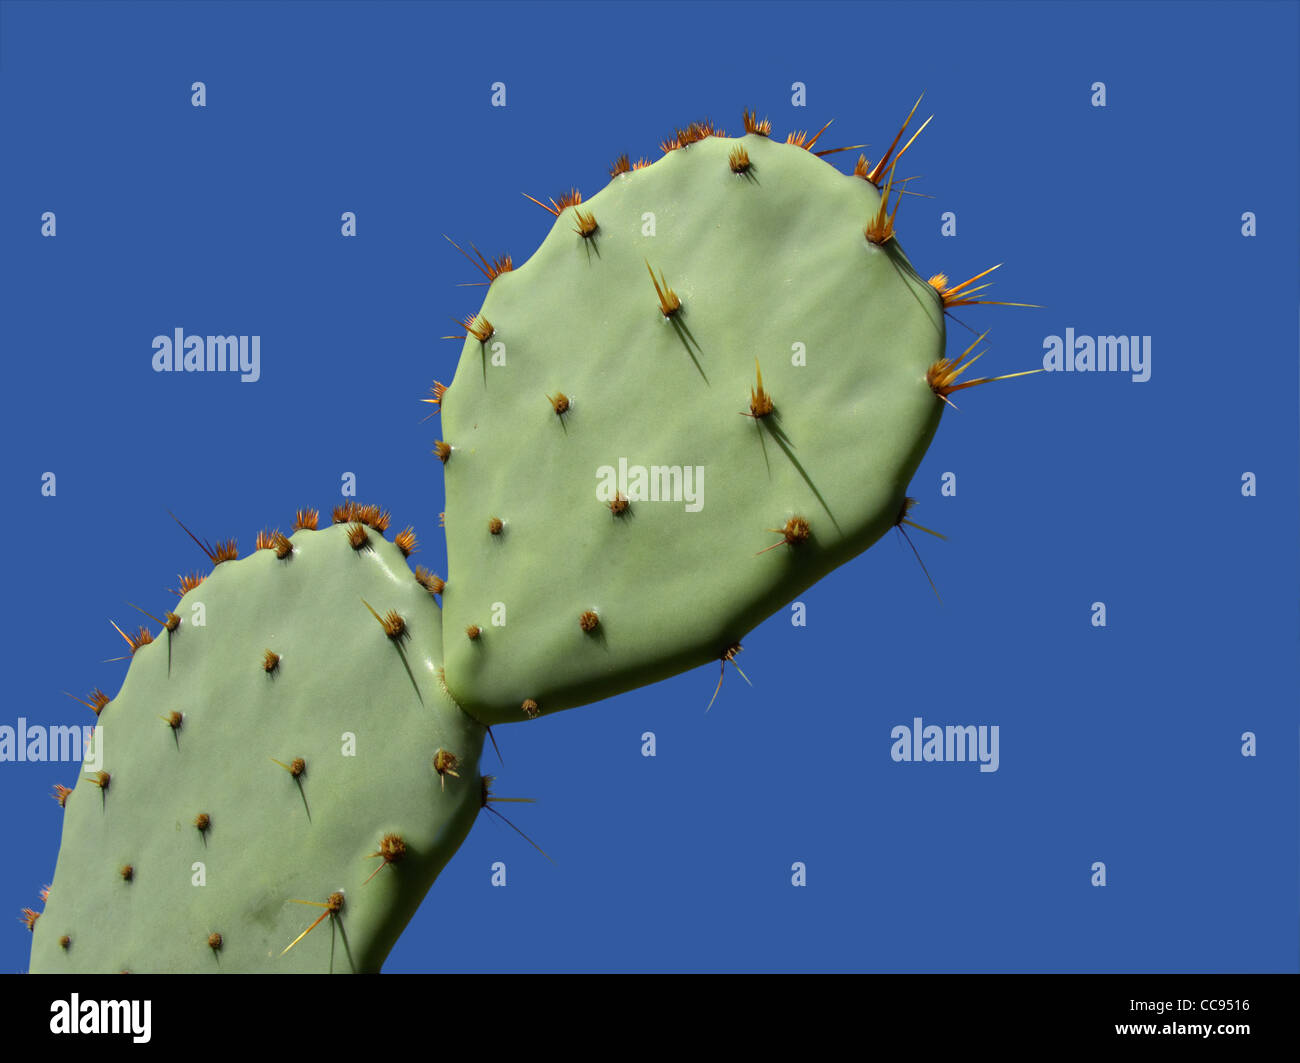 Leaves of a prickly pear cactus plant (Opuntia spp.) with thorns against a blue sky Stock Photo